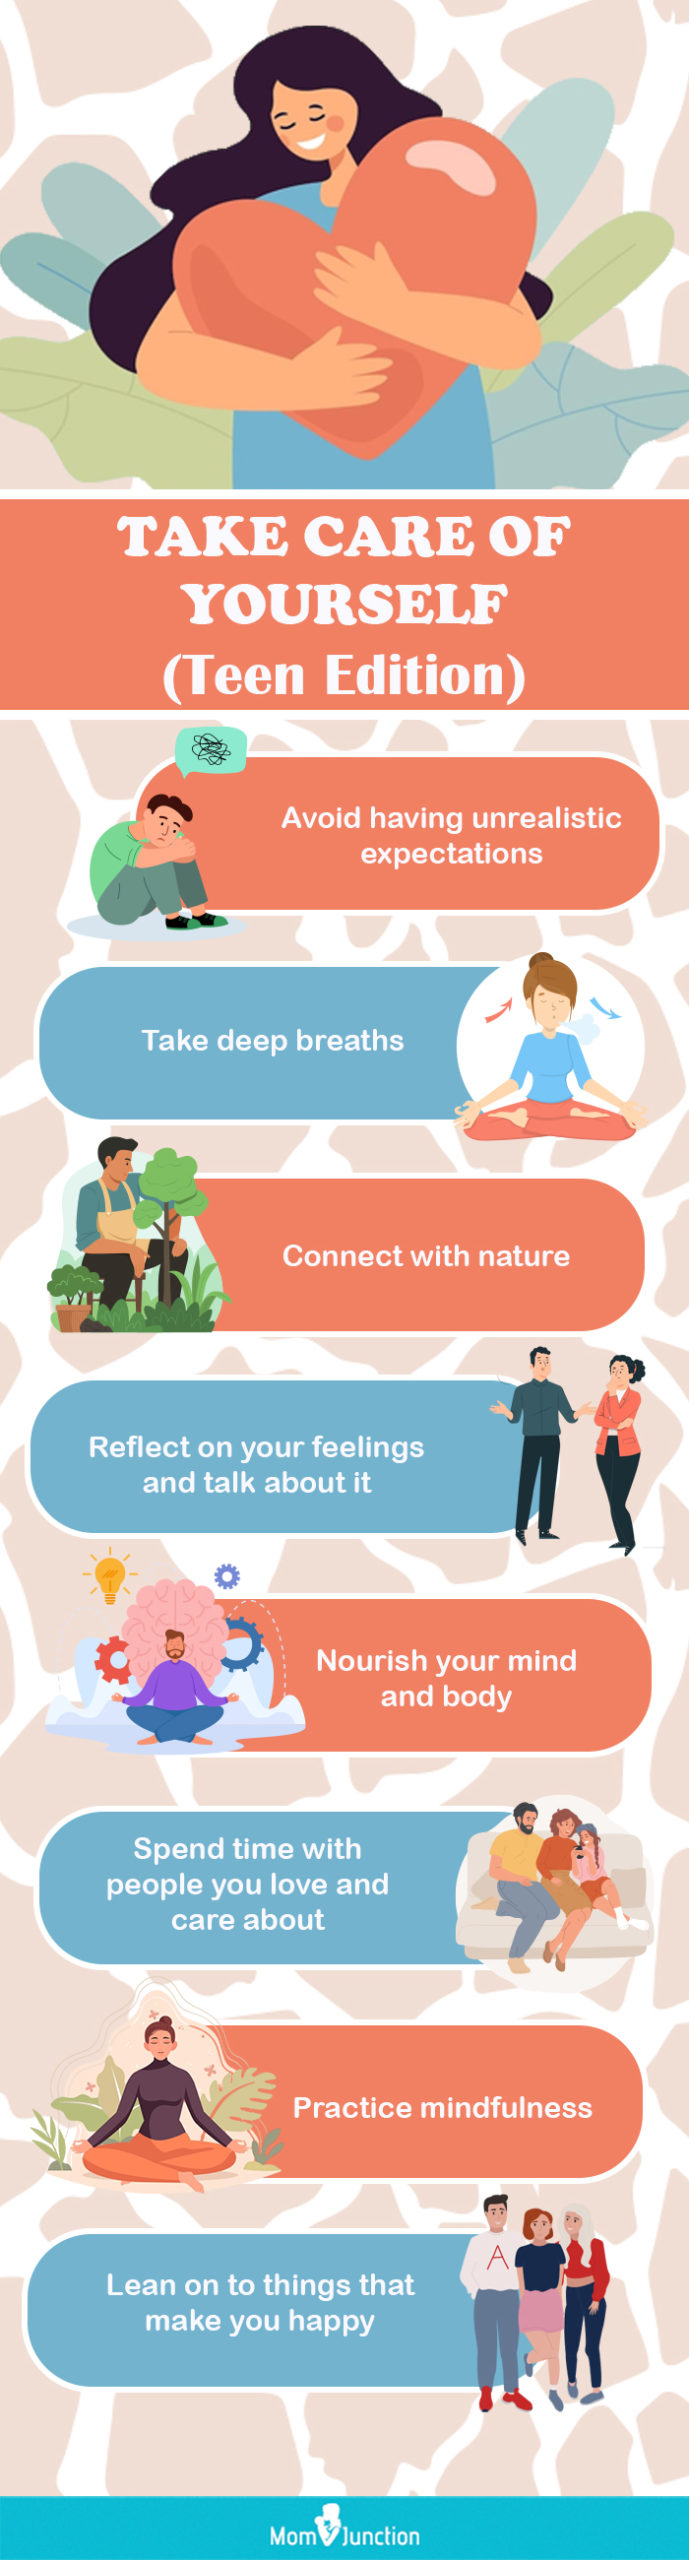 self care for teens [infographic]